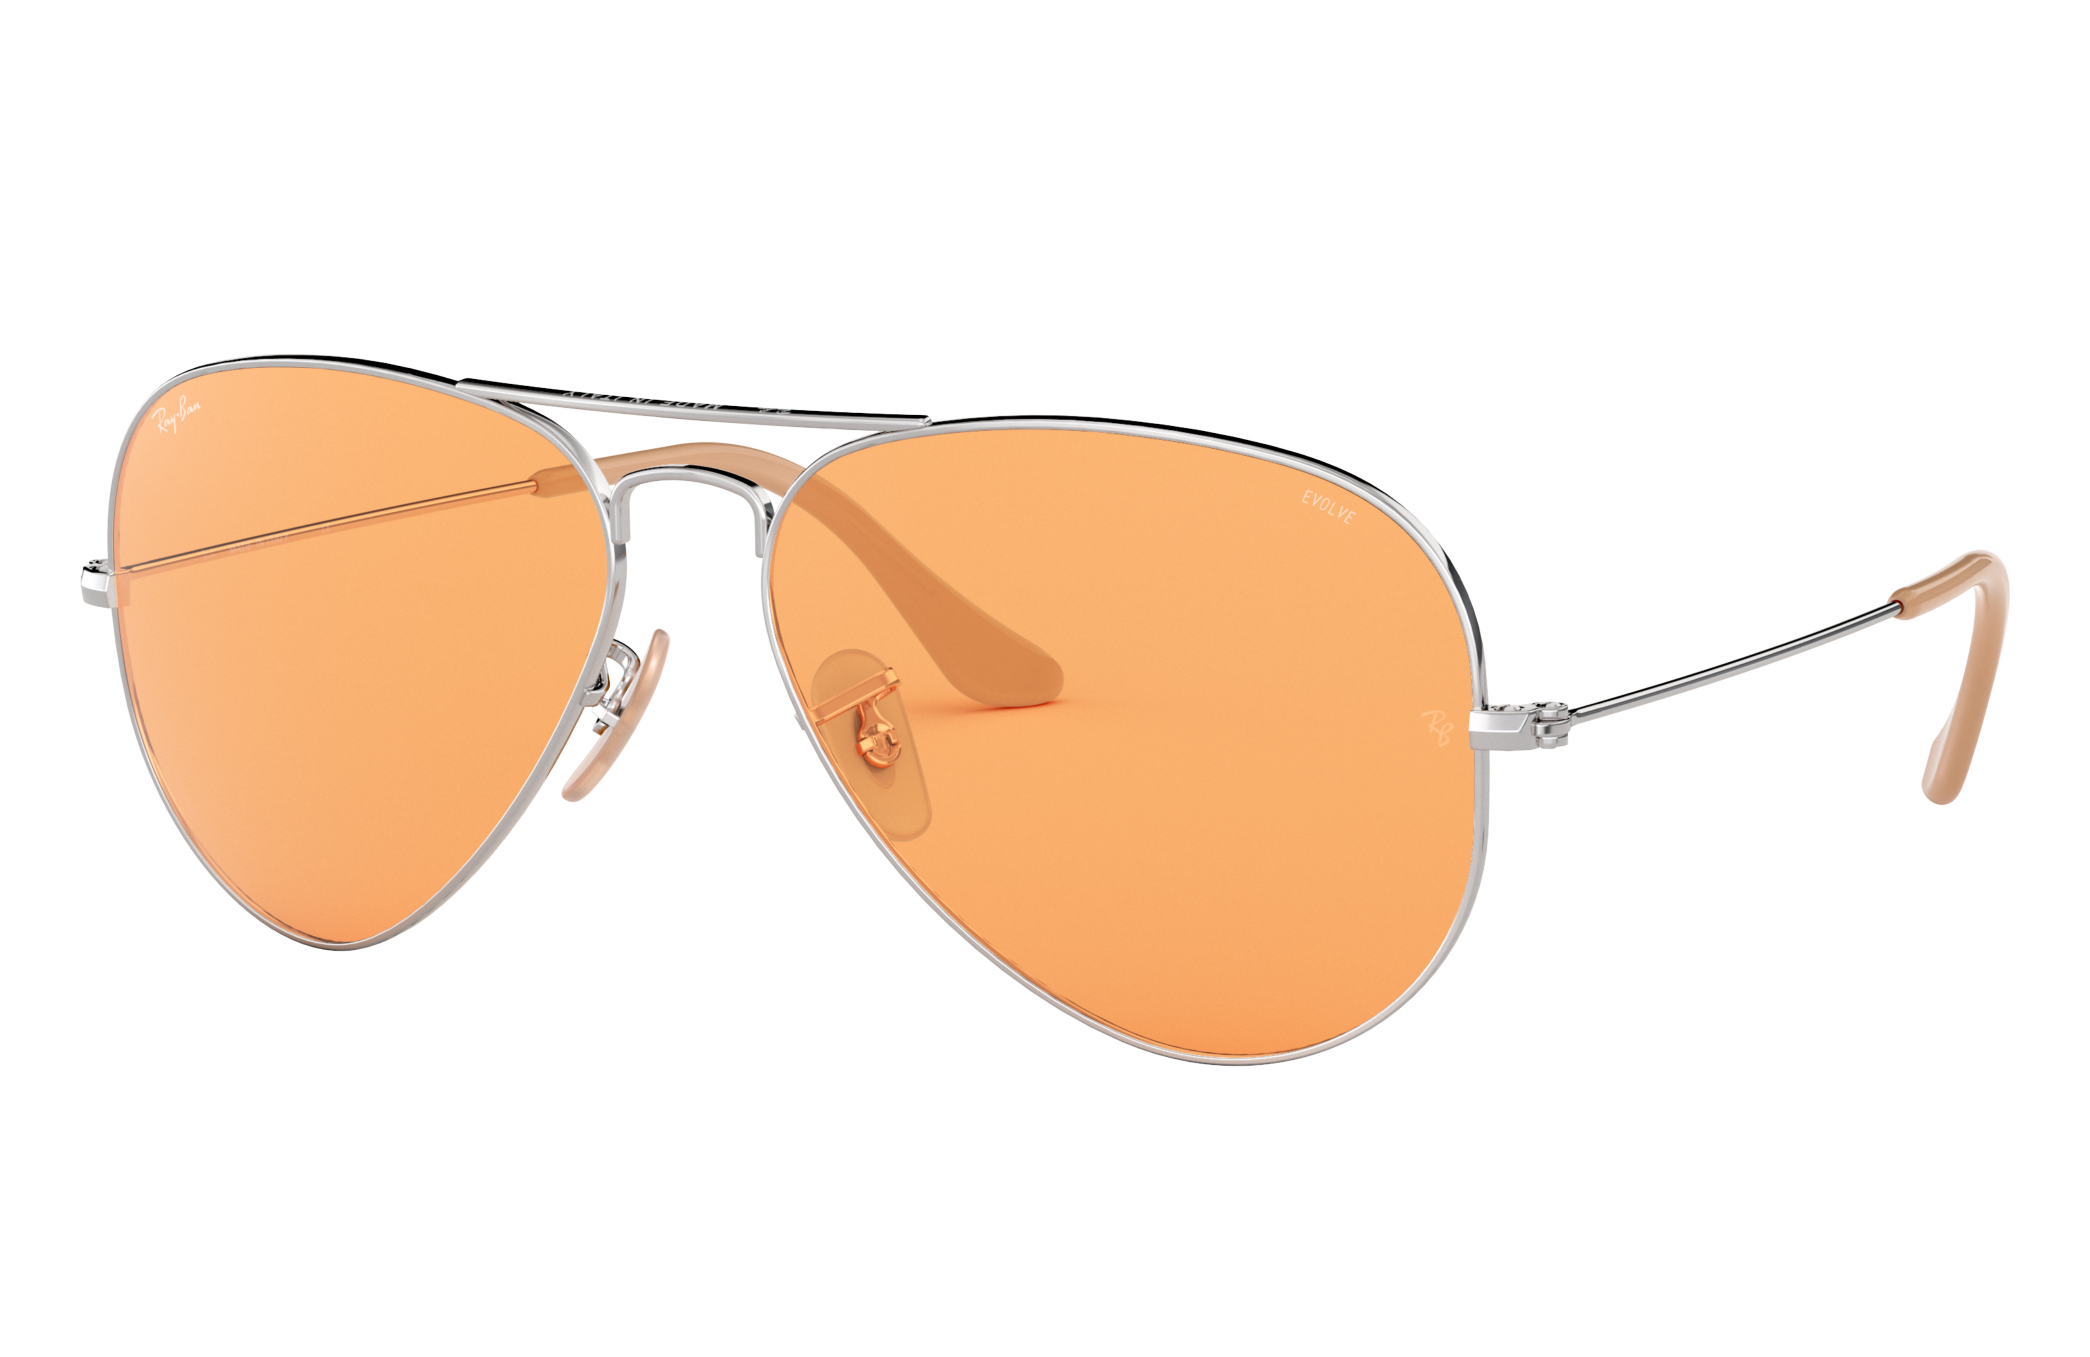 Aviator Washed Evolve Sunglasses in Silver and Orange Photochromic | Ray-Ban ®